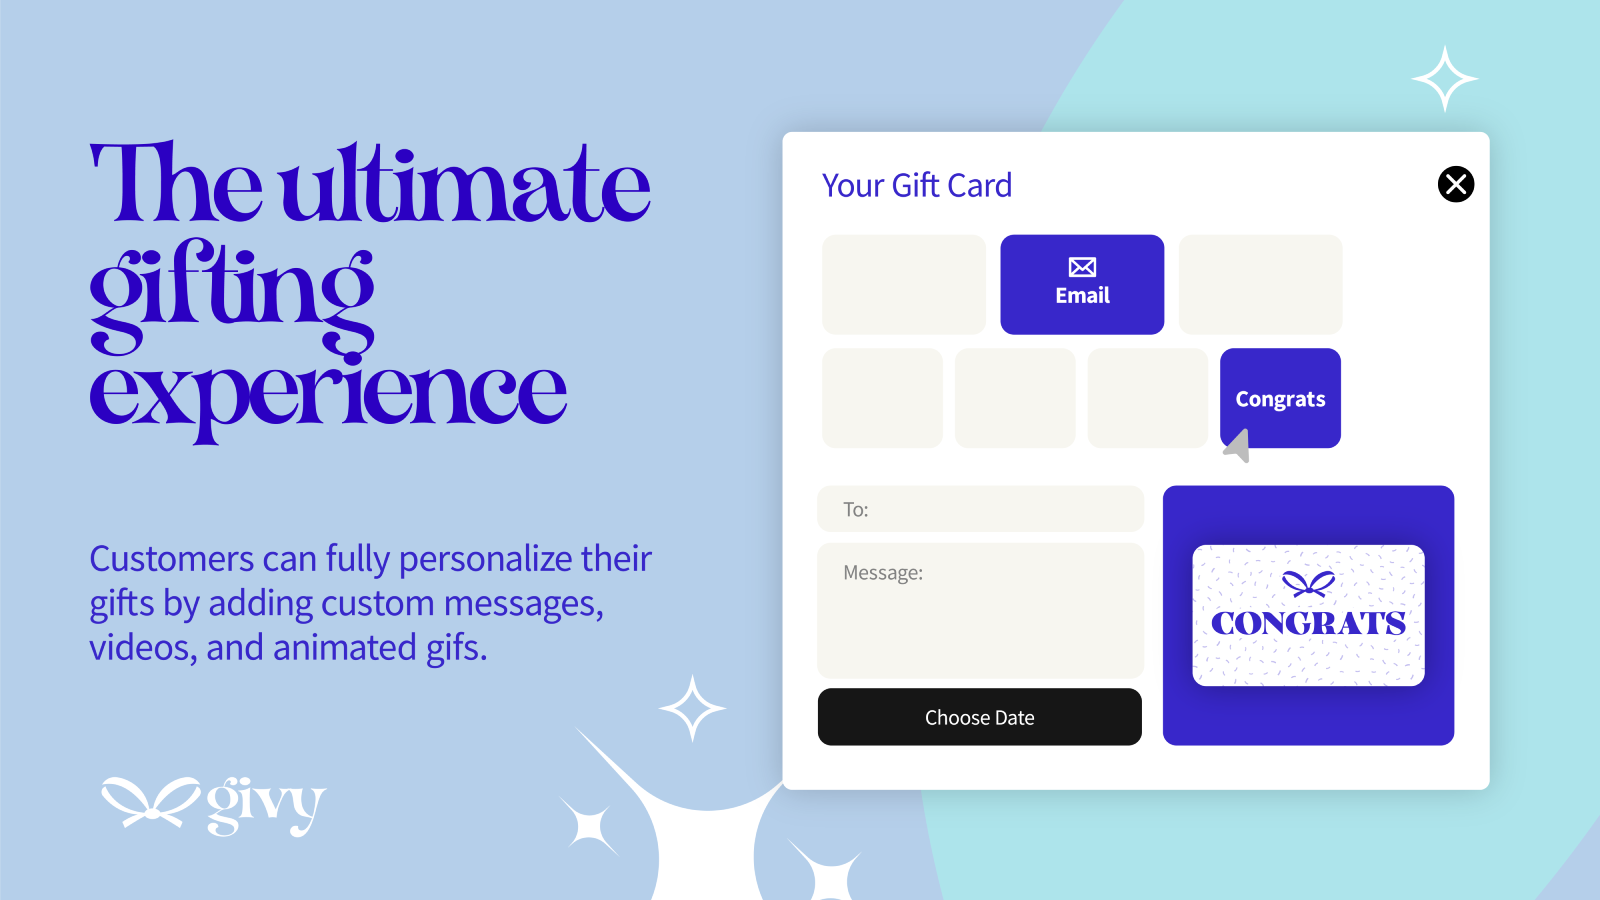 Gift card personalization - include custom messages, gif, video